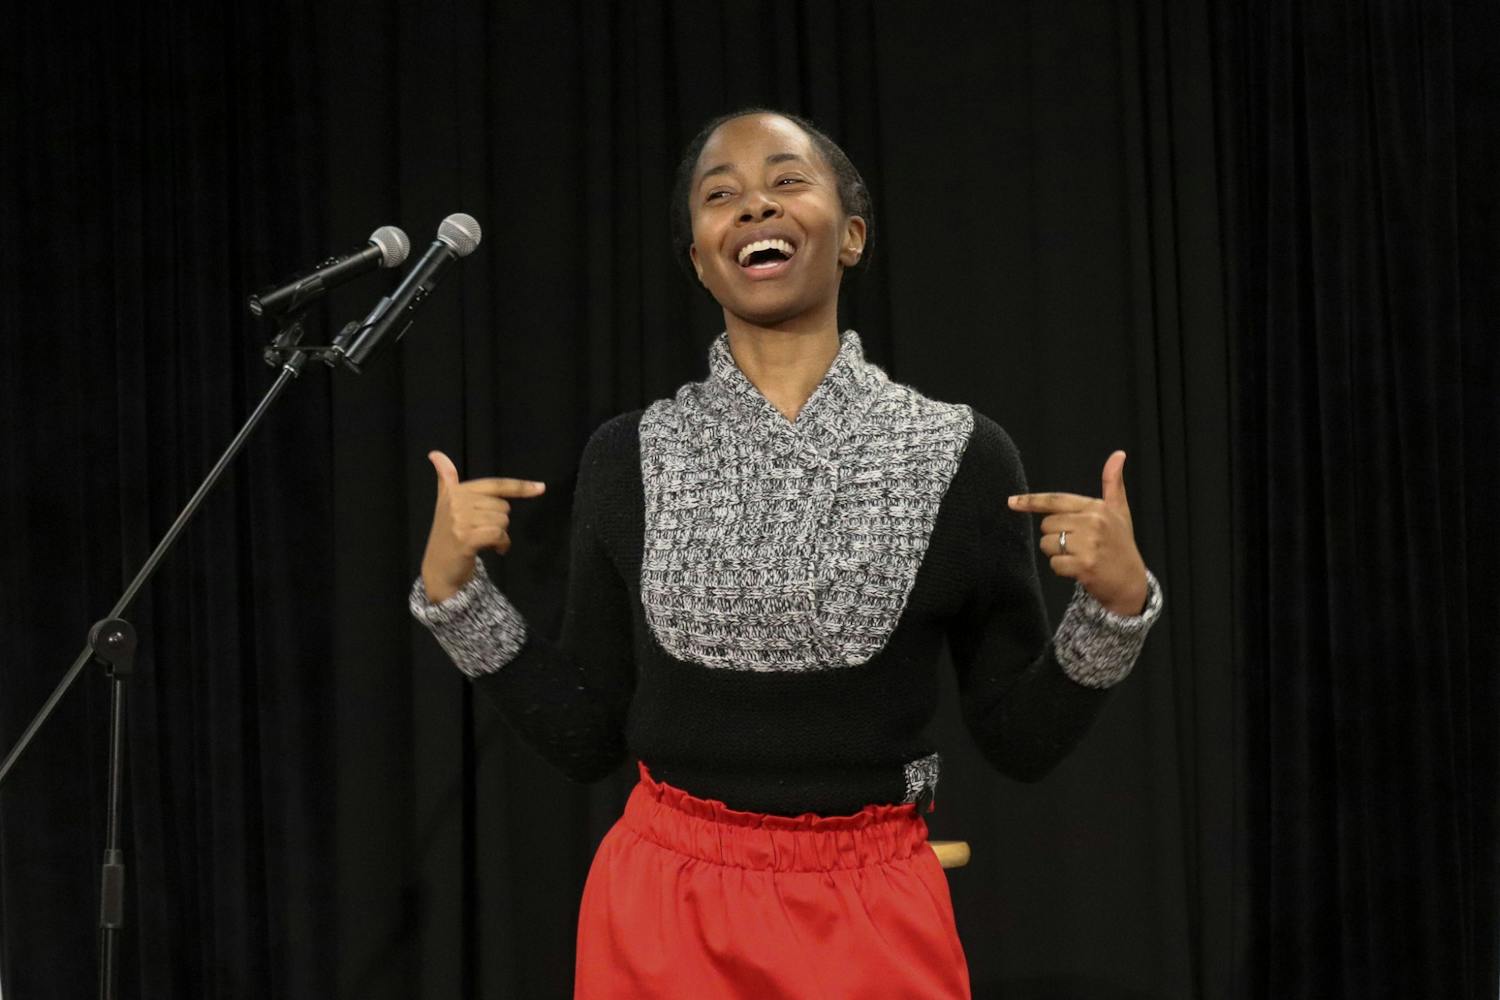 Traci Neal, a 鶹С򽴫ý alumni and NY Times published writer delivers some slam poetry during the UniVerse Popcorn &amp; Poetry event on Jan. 26, 2022. First Lady Patricia Harris-Pastides, creator of UniVERSE, was in attendance during the event.